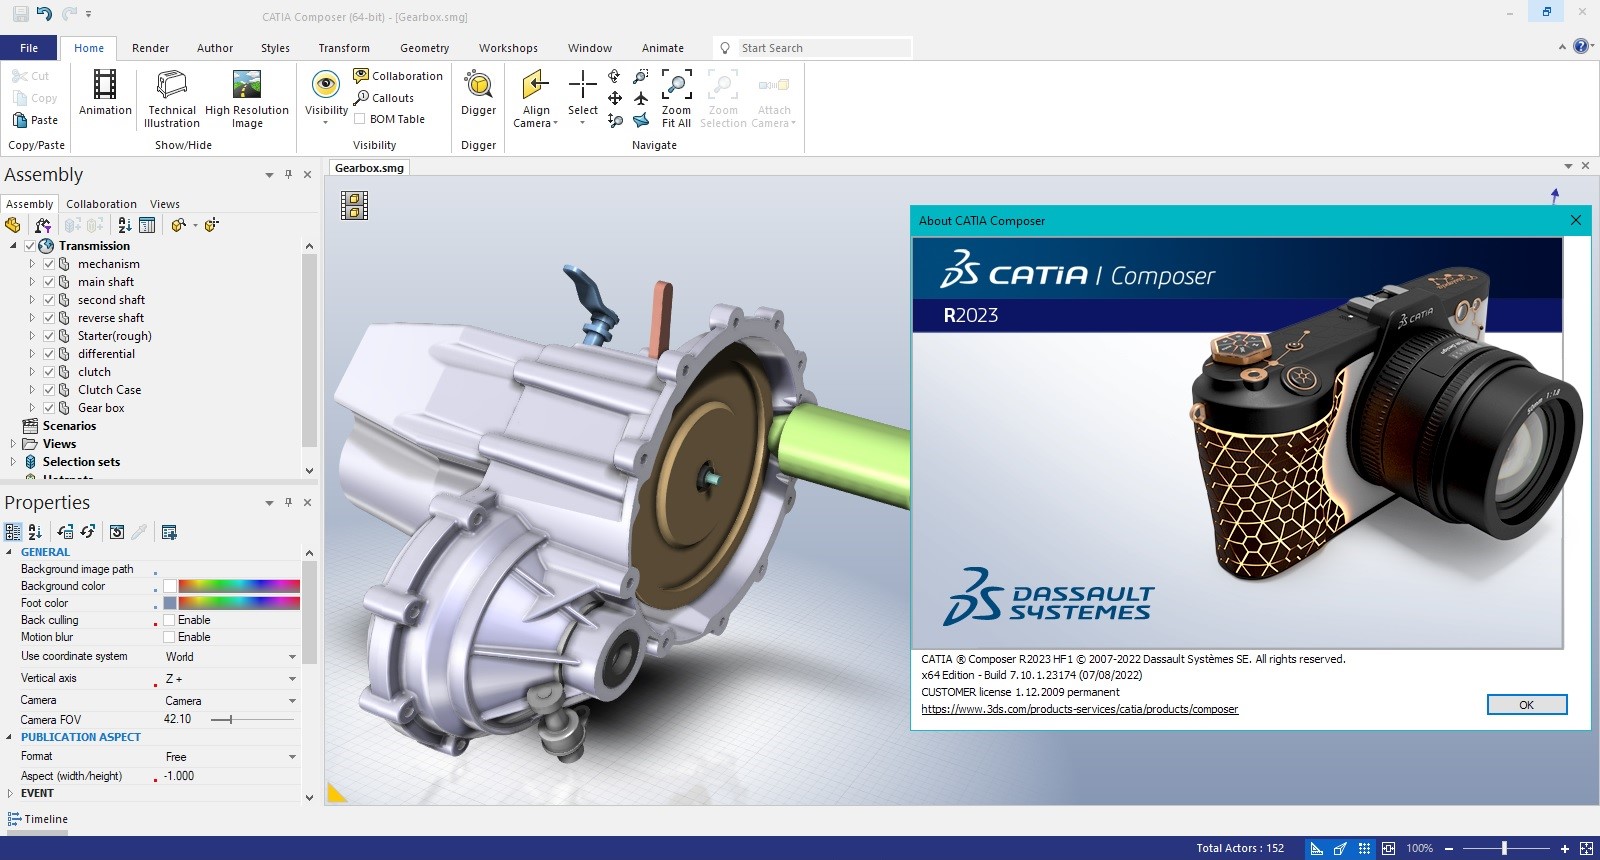 Working with DS CATIA Composer R2023 HF1 Win64 full